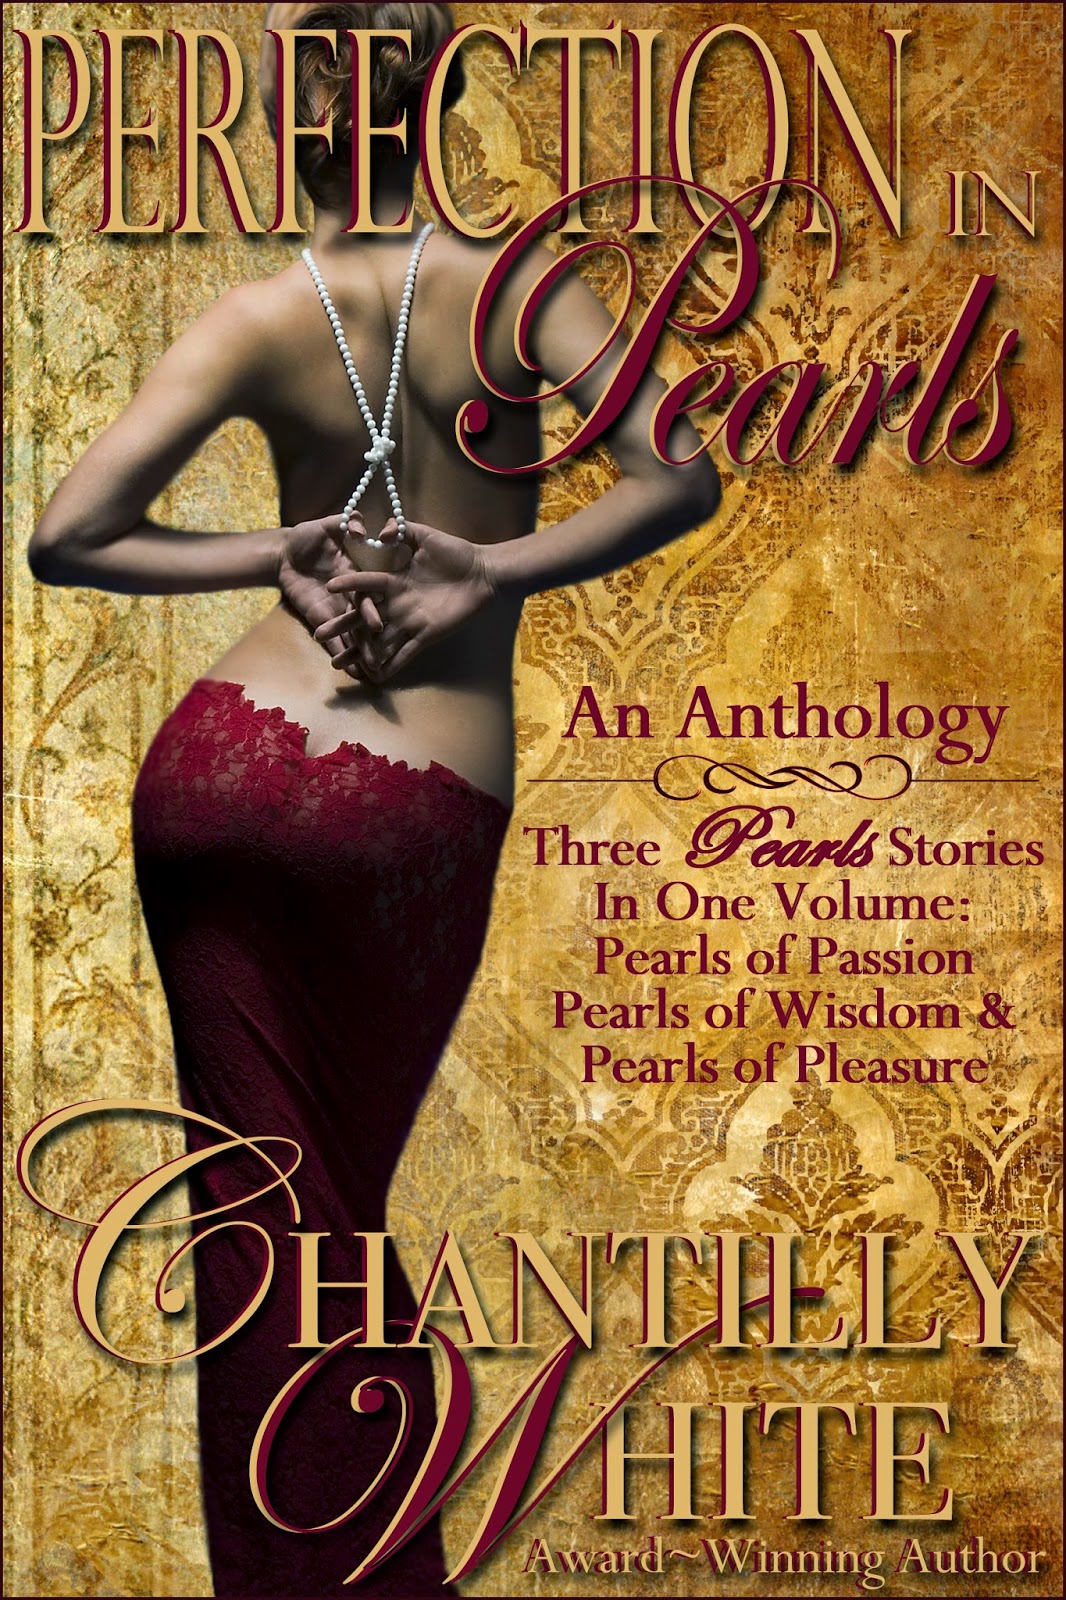 Perfection In Pearls by Chantilly White